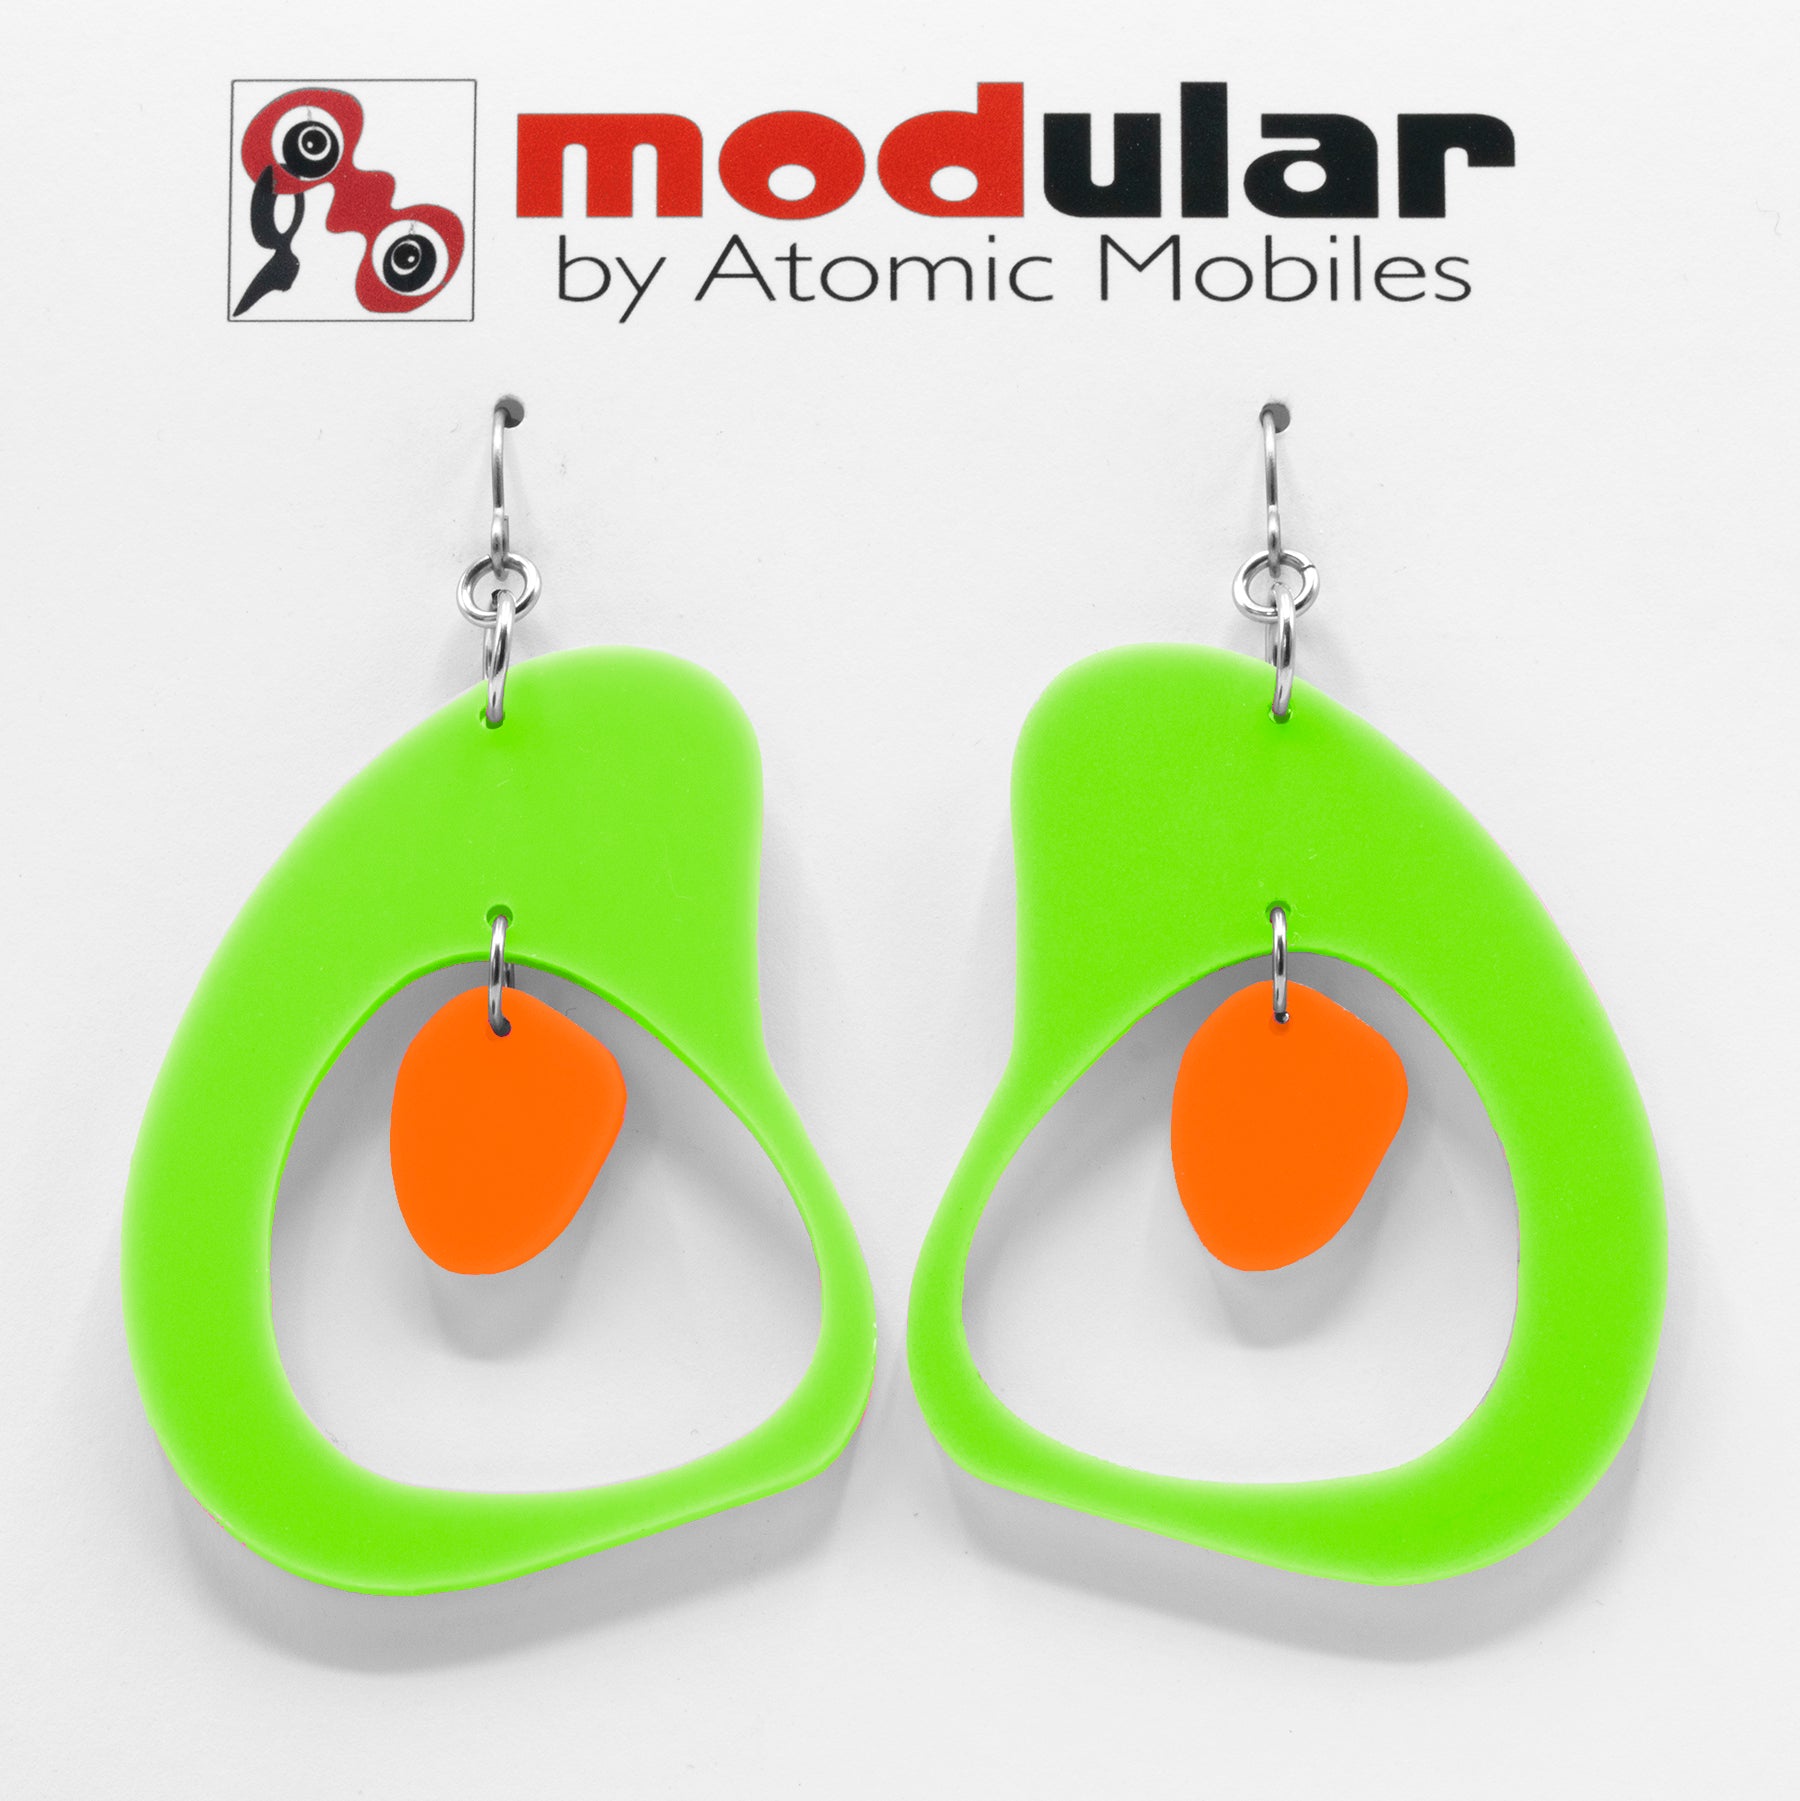 MODular Earrings - Boomerang Statement Earrings in Lime and Orange by AtomicMobiles.com - retro era inspired mod handmade jewelry